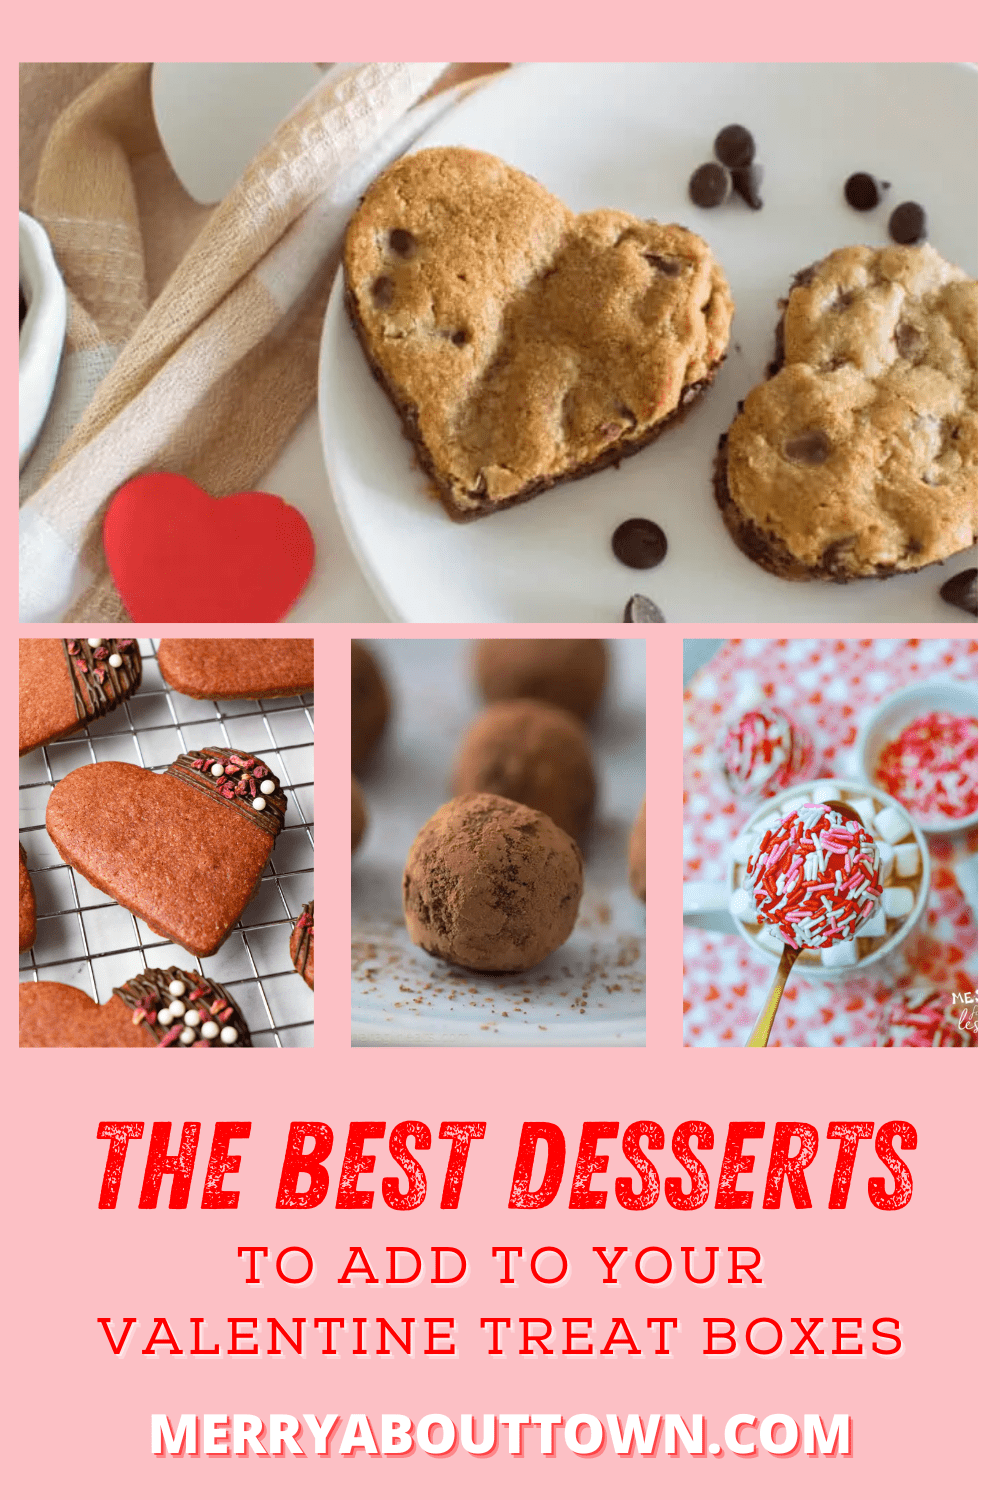 It’s the most romantic time of the year! Feel like spoiling your loved ones? Why not bake some delicious desserts to fill up your Valentine Treat Boxes?